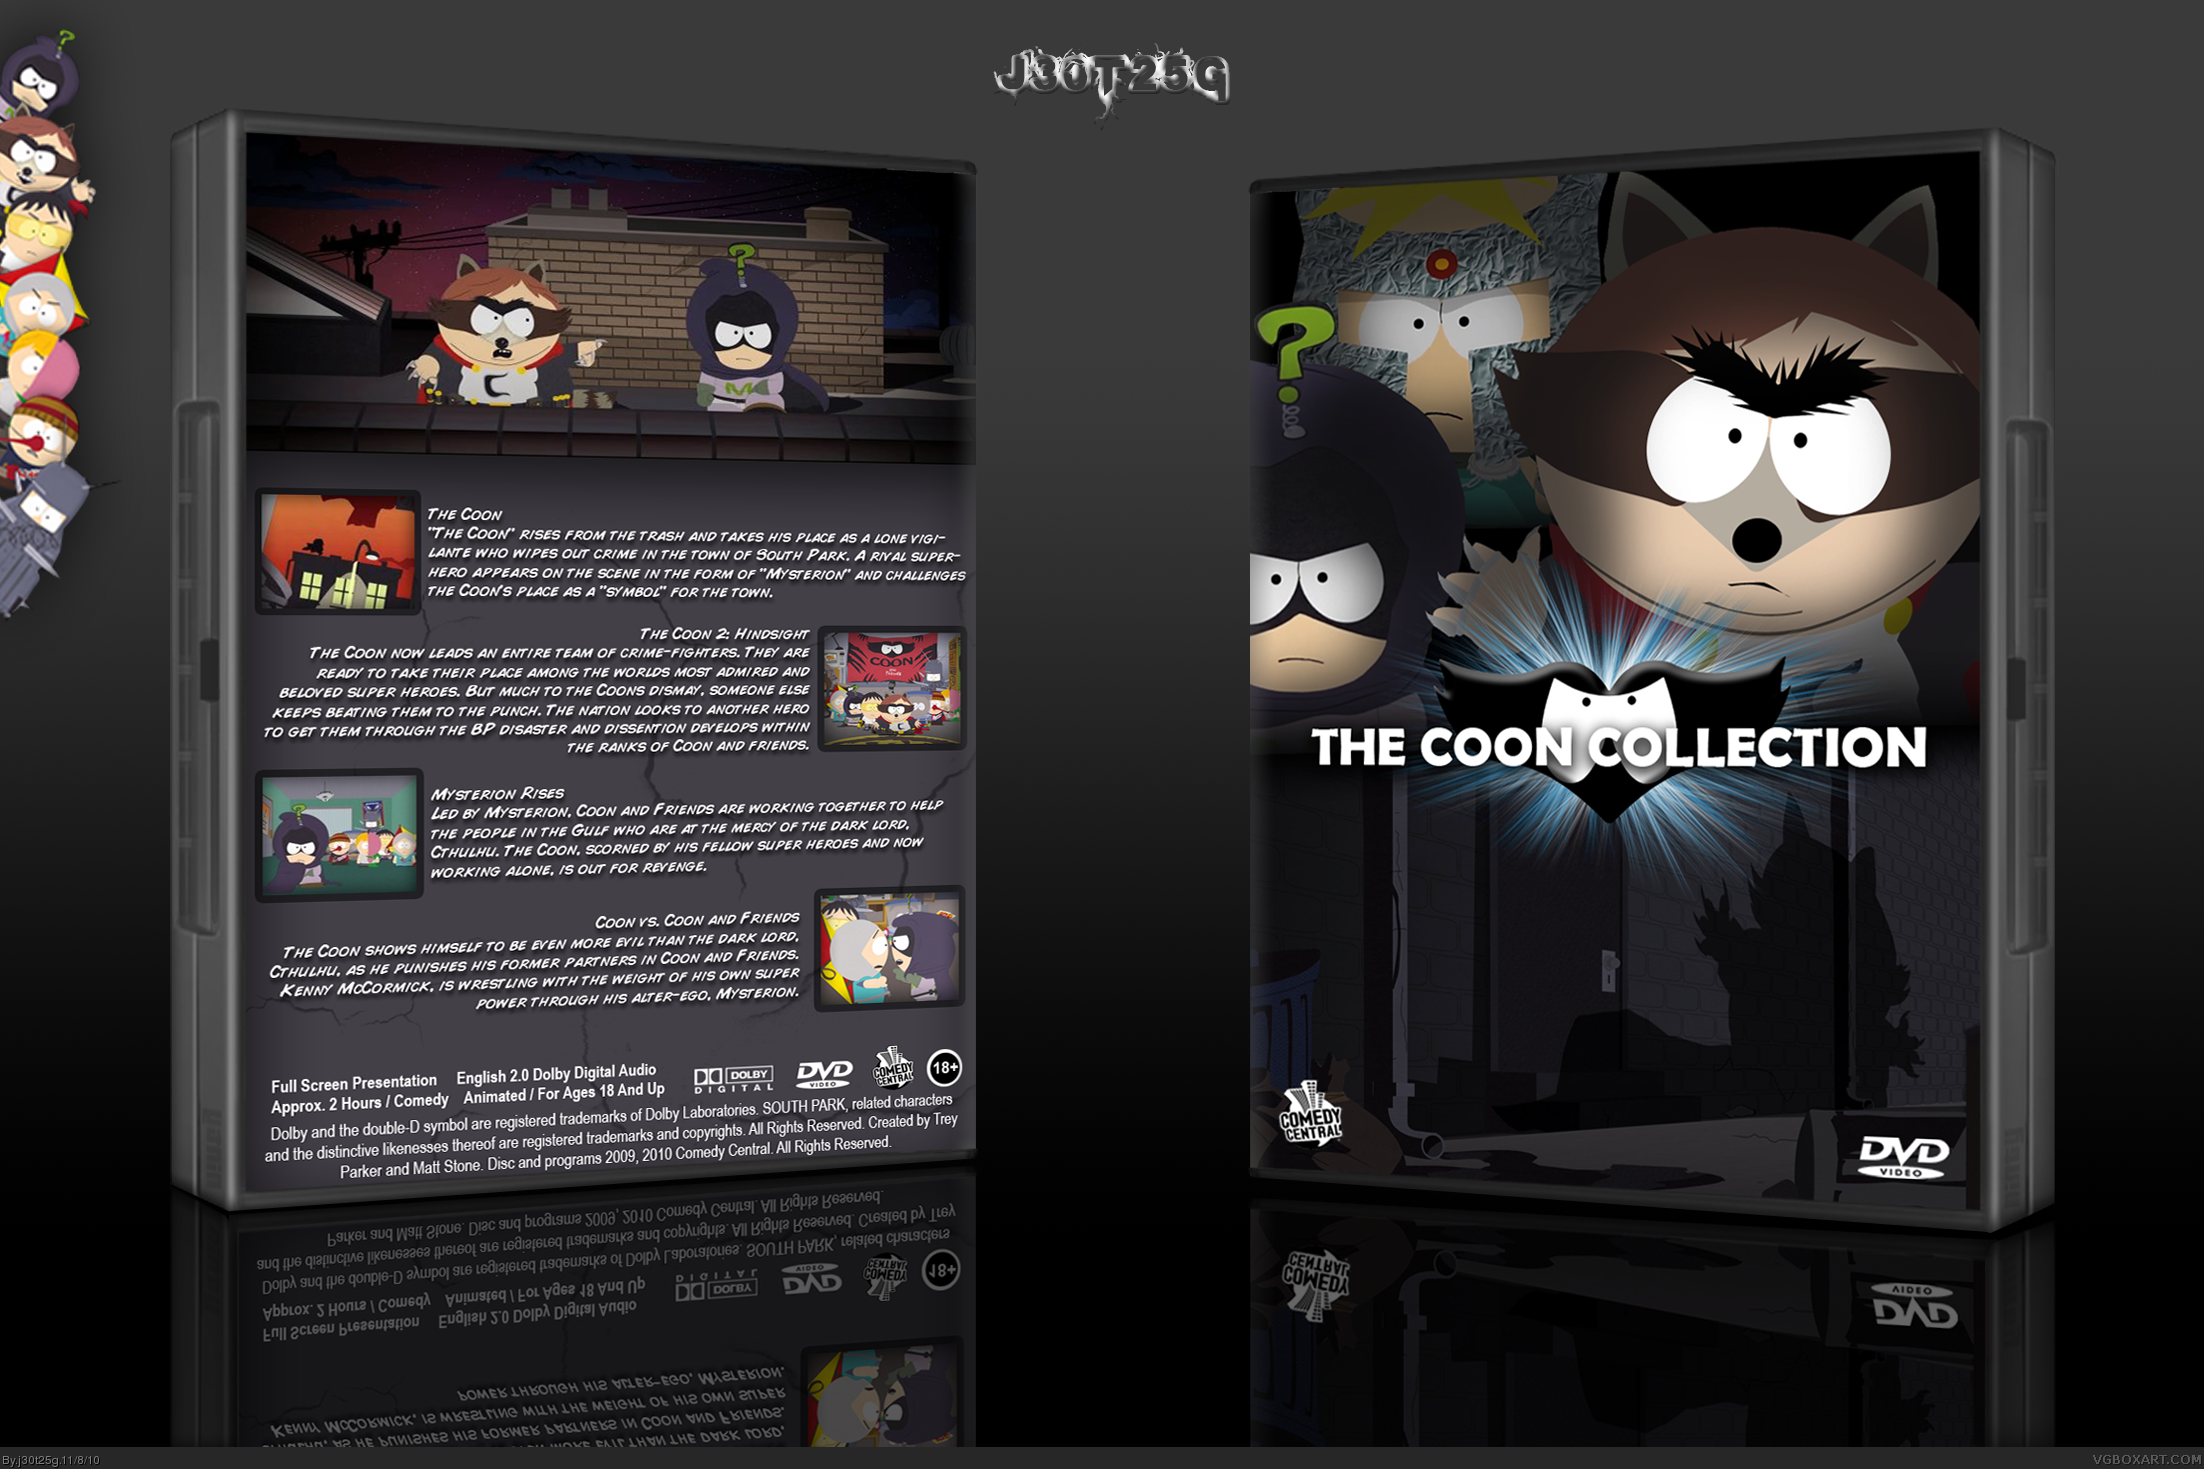 South Park: The Coon Collection box cover